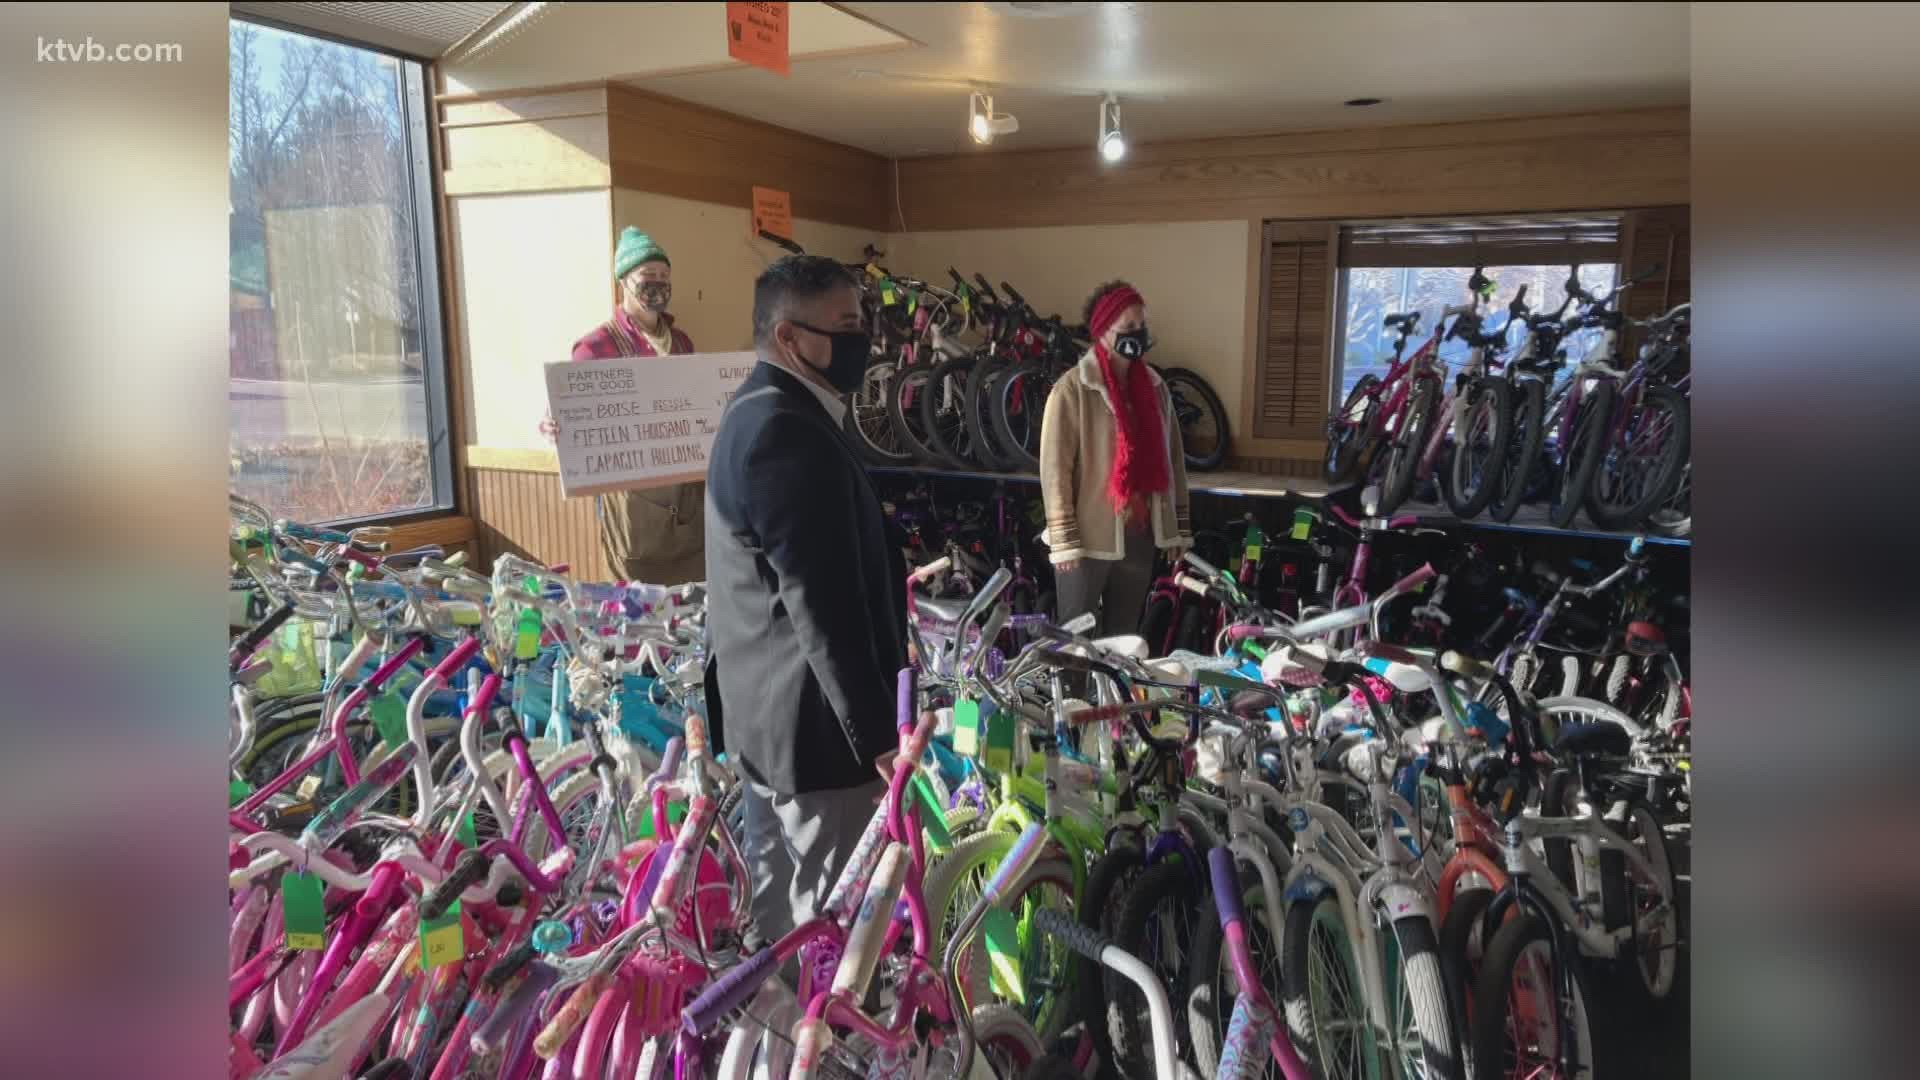 The Boise Bicycle Project received $15,000 on Thursday.